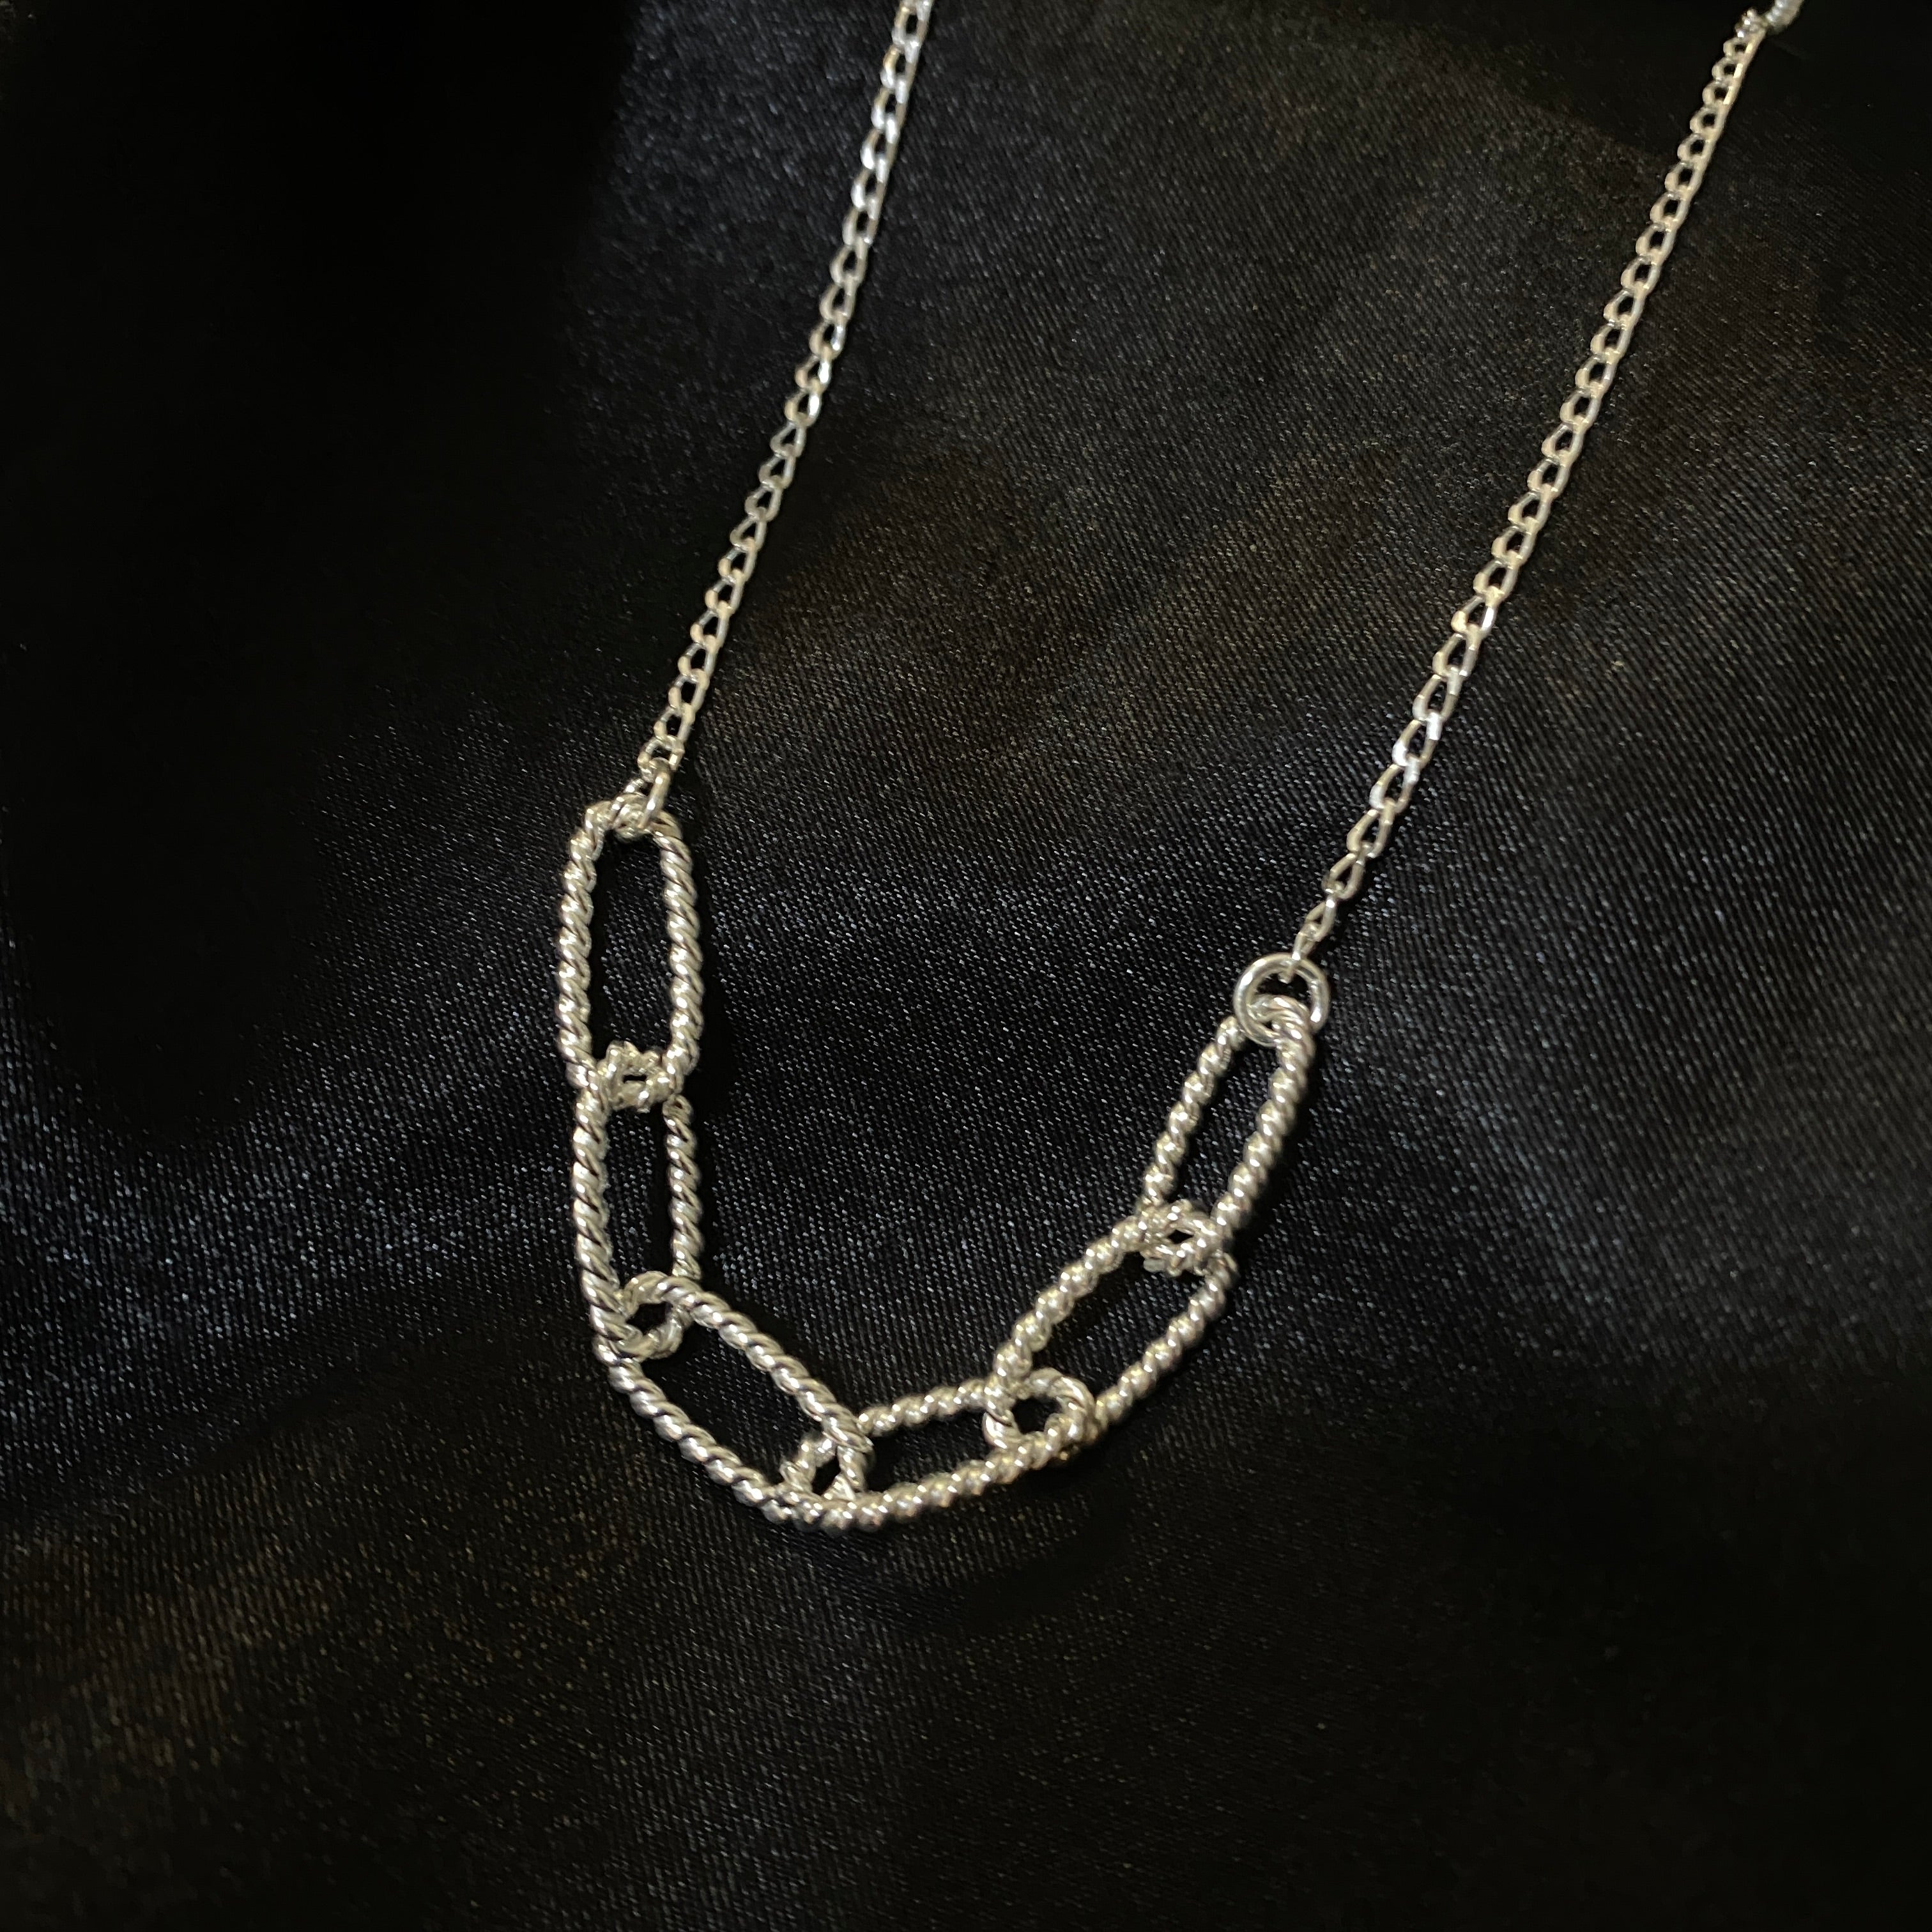 Chain Link Necklace.